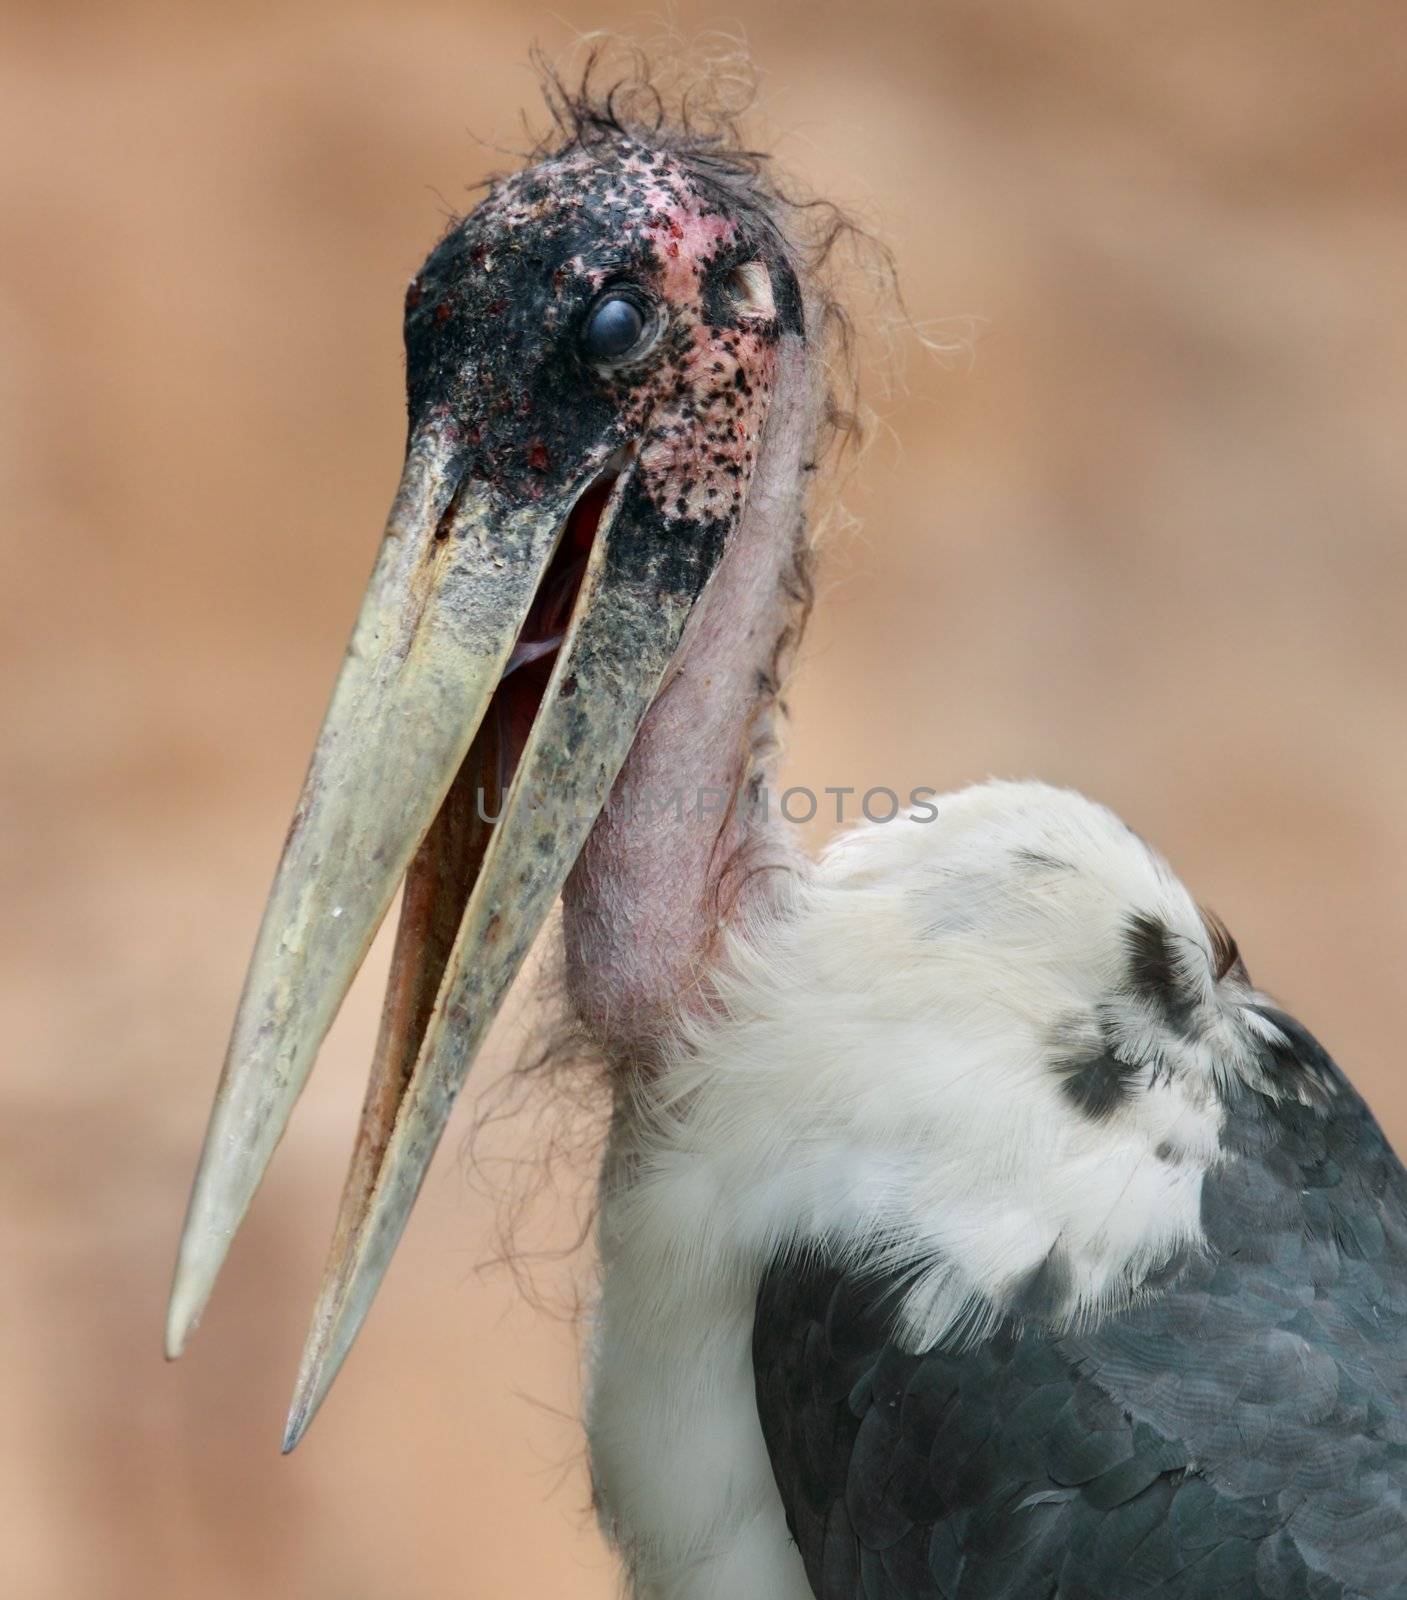 ficture of an ugly african bird